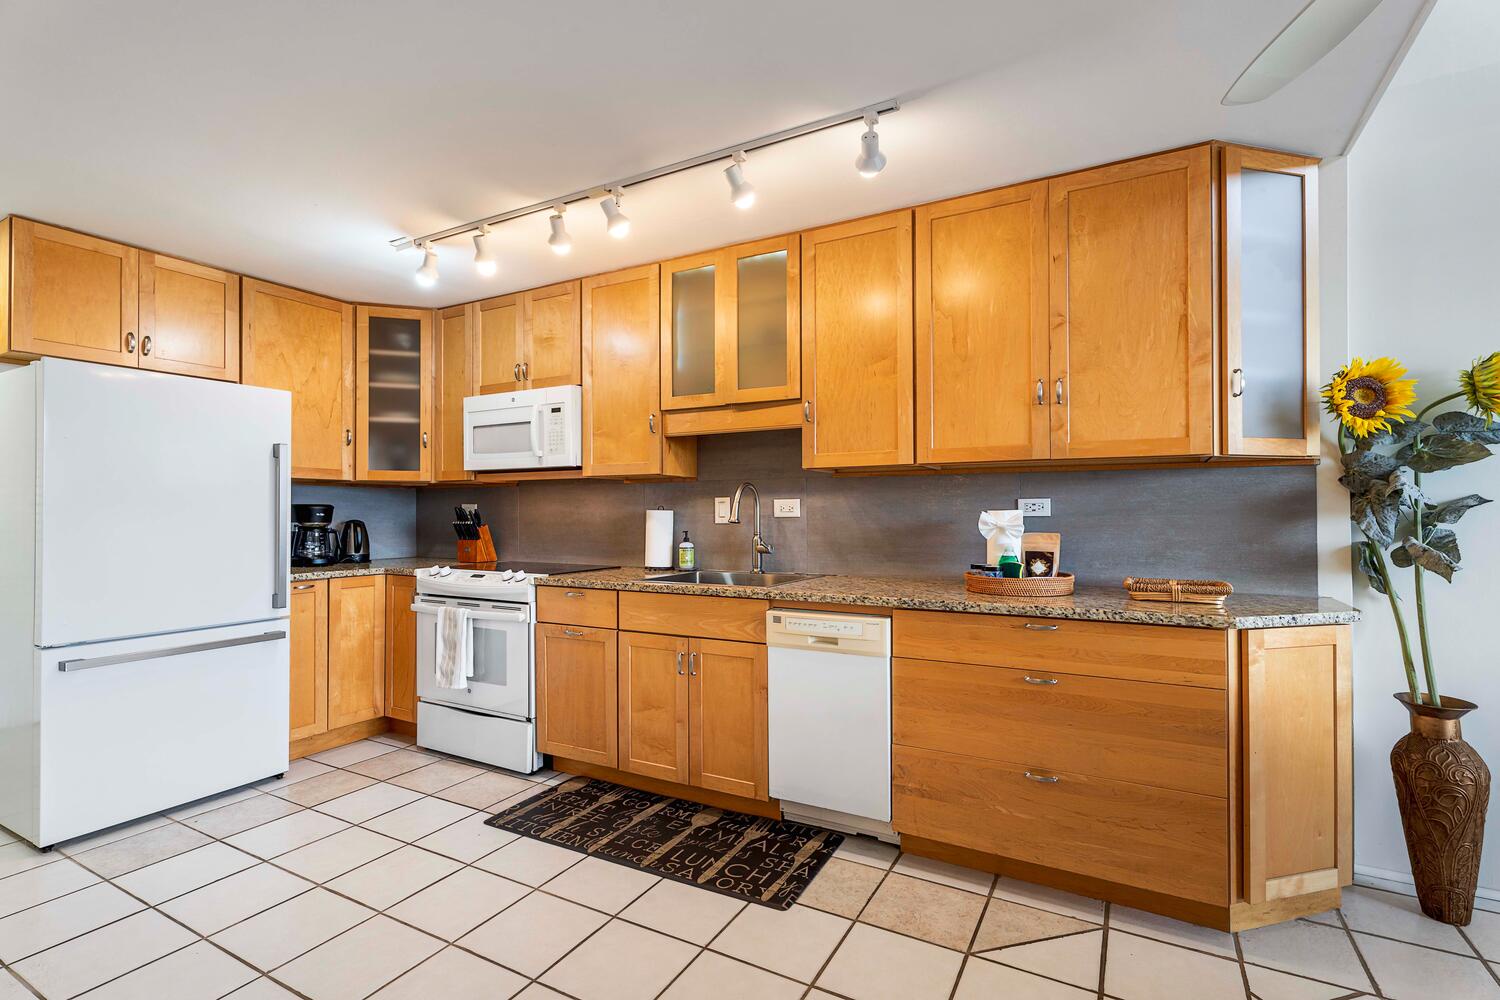 Kailua Kona Vacation Rentals, Kona Alii 512 - The kitchen area with ample space to whip up your favorite meals.